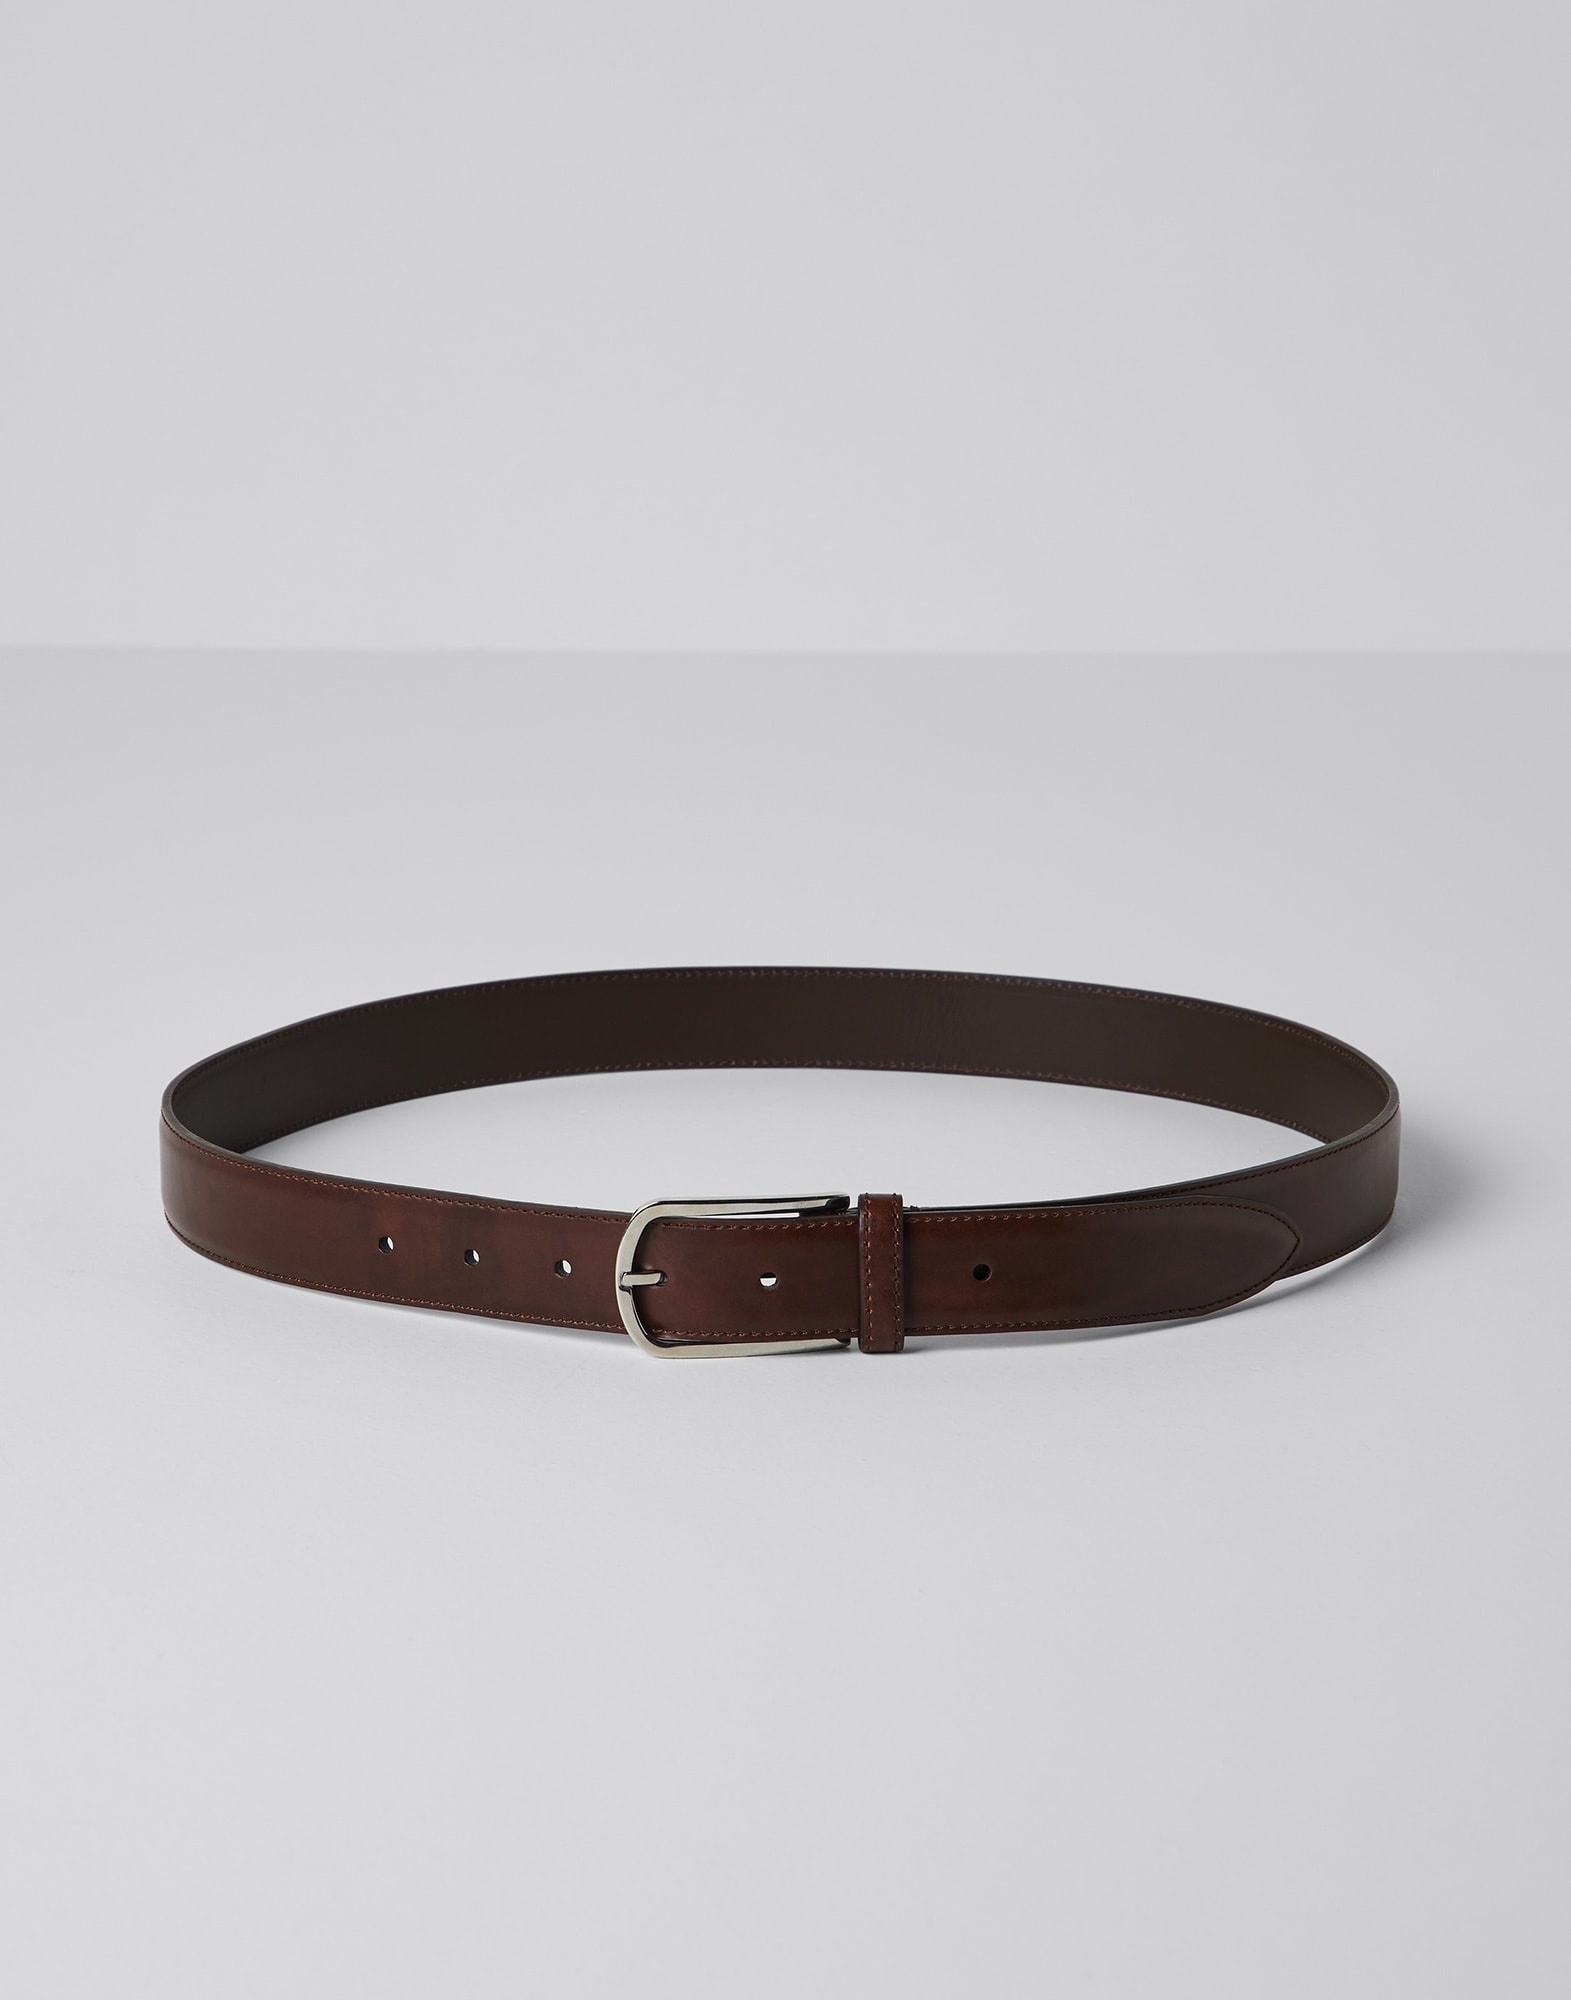 Formal calfskin belt with rounded buckle - 1